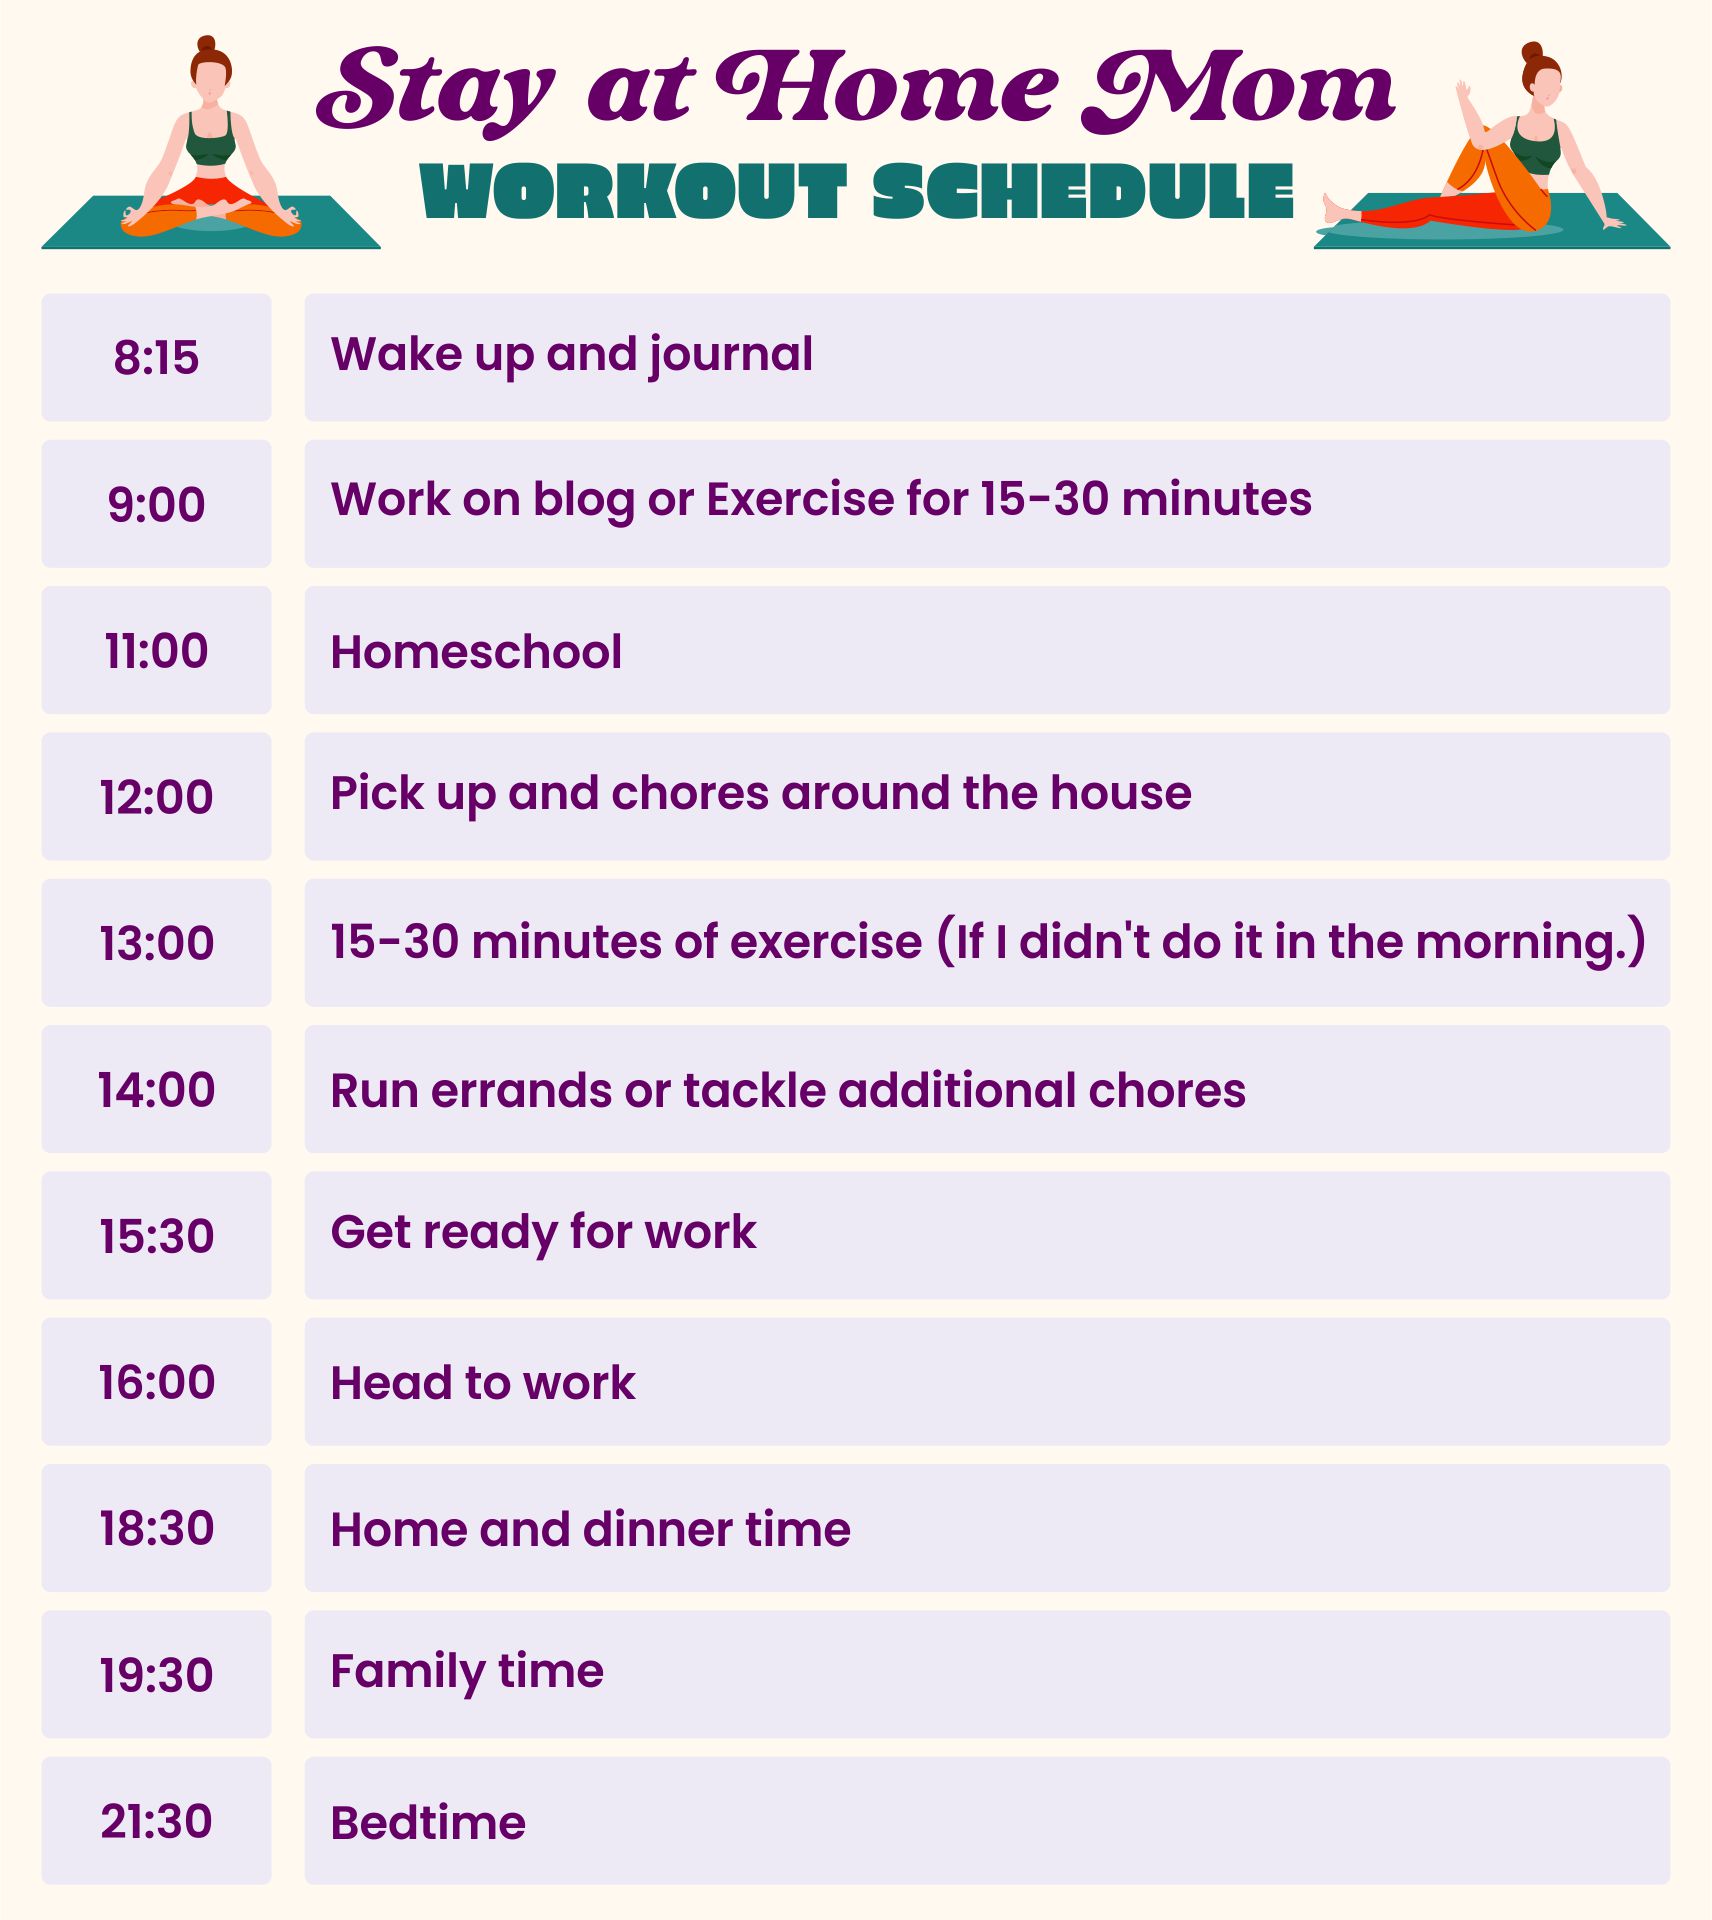 Stay at Home Mom Workout Schedule